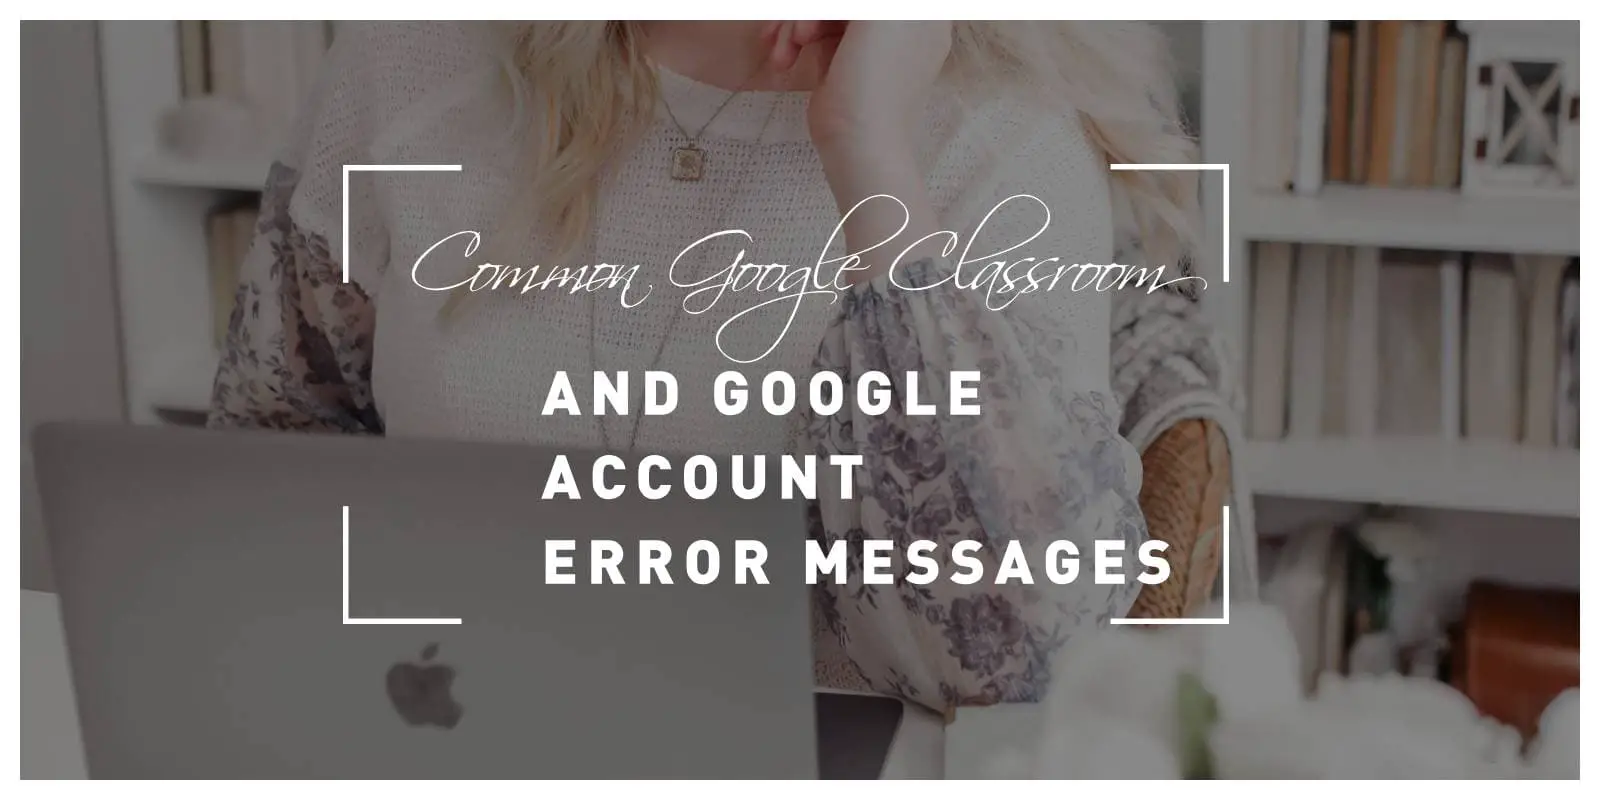 Common Google Classroom and Google Account Error Messages